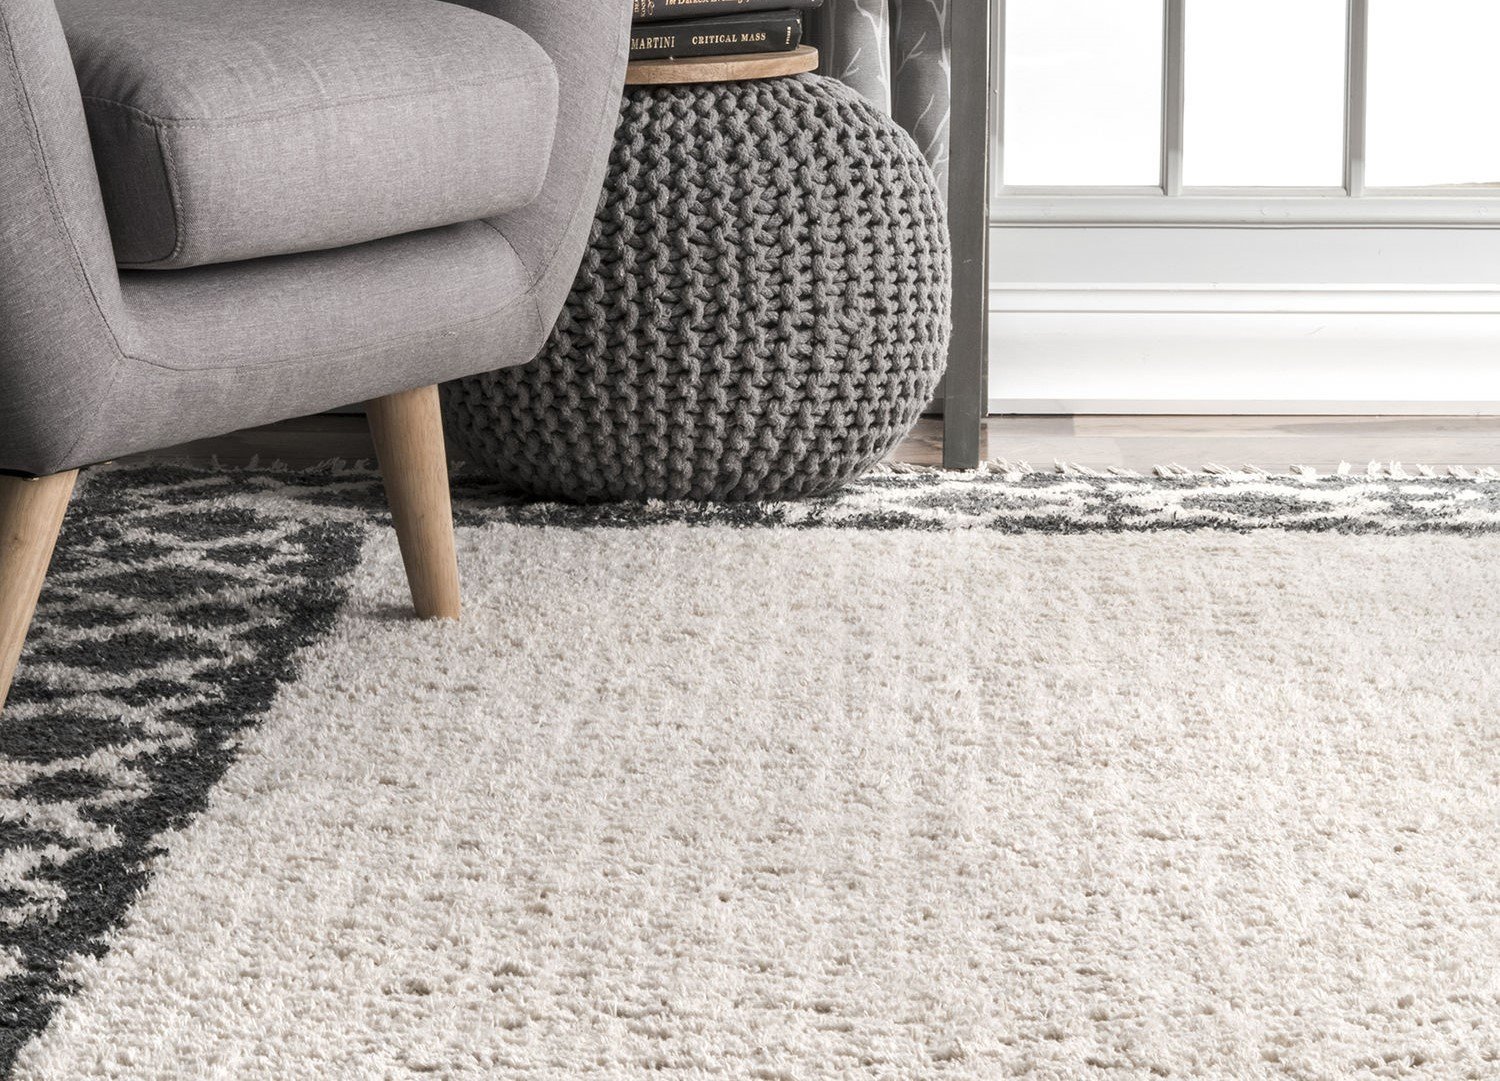 How to Get Bad Smells Out of Your Rug